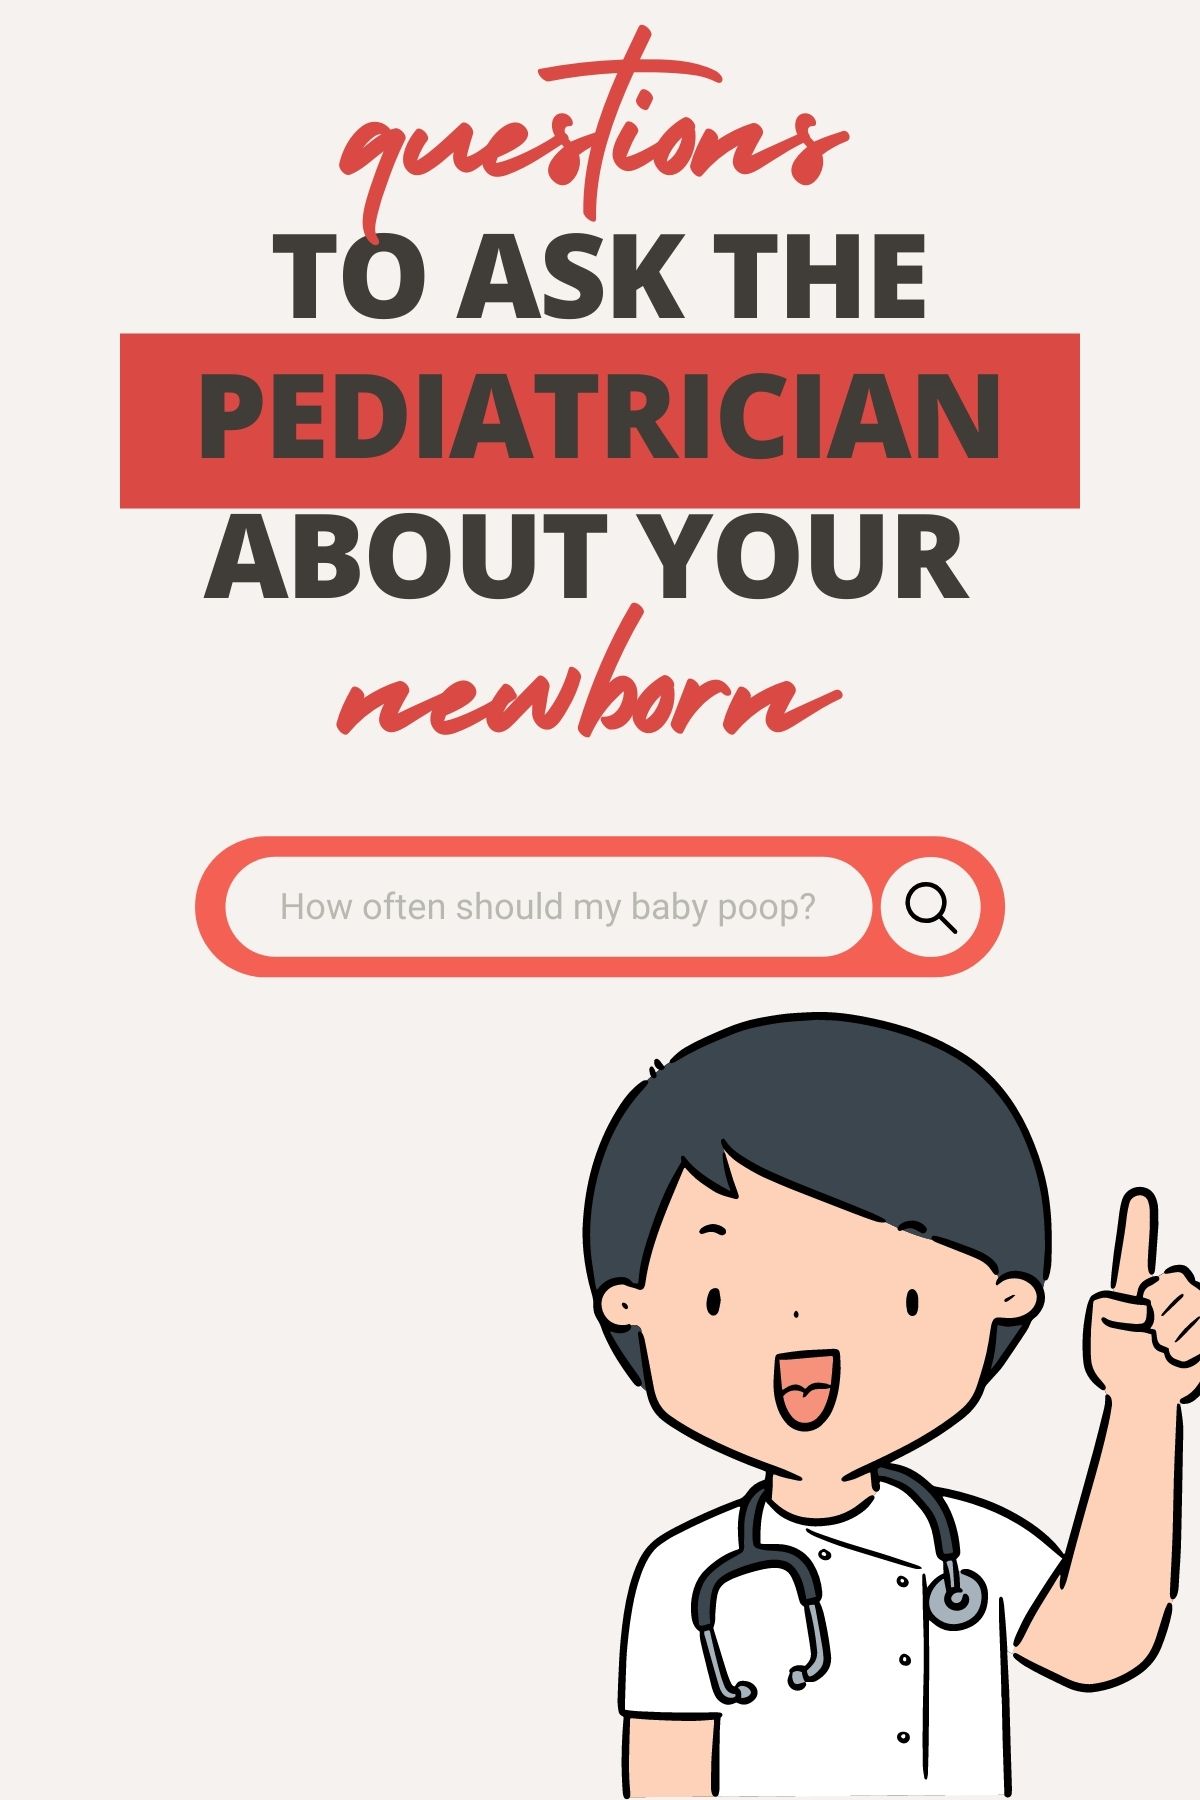 Questions To Ask on Baby’s First Pediatrician Visit